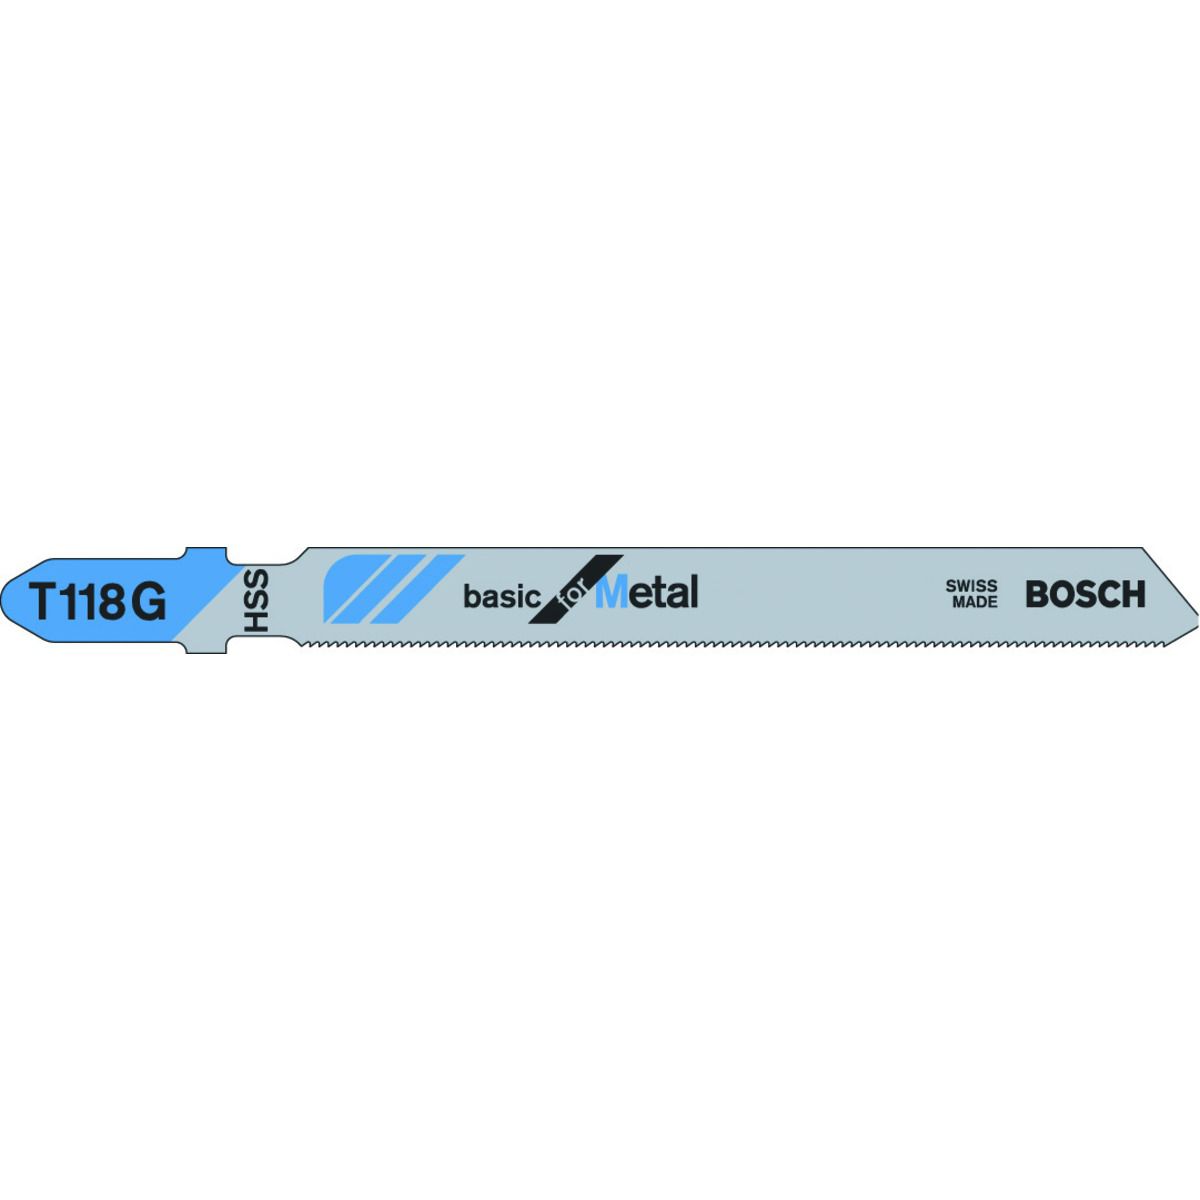 Image of Bosch T118G Metal Jigsaw Blades - Pack of 5